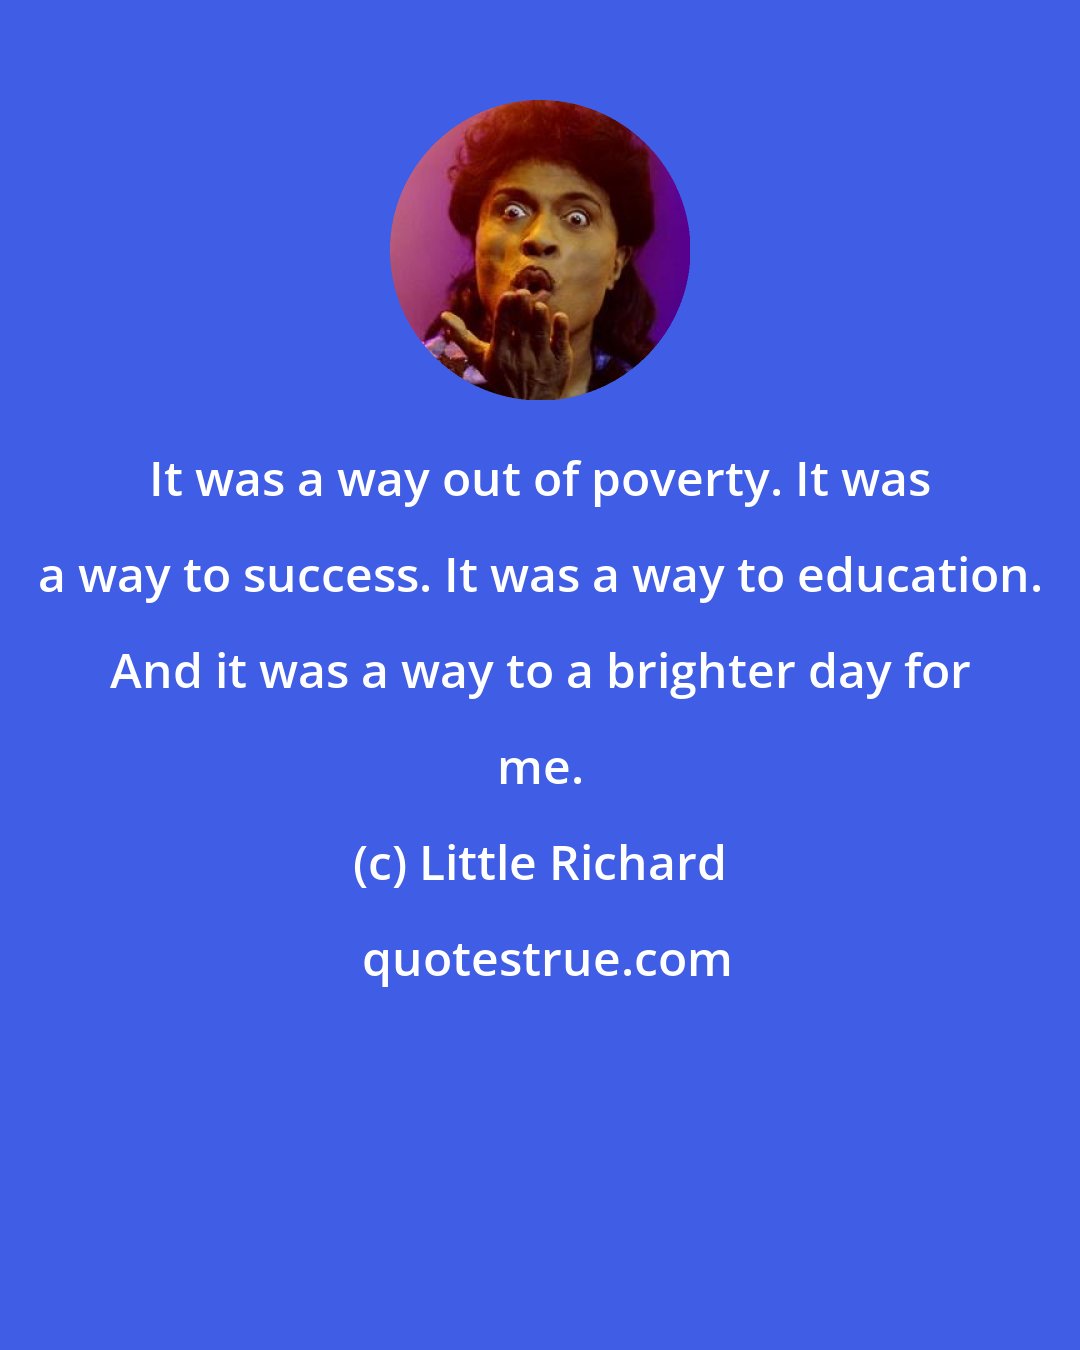 Little Richard: It was a way out of poverty. It was a way to success. It was a way to education. And it was a way to a brighter day for me.